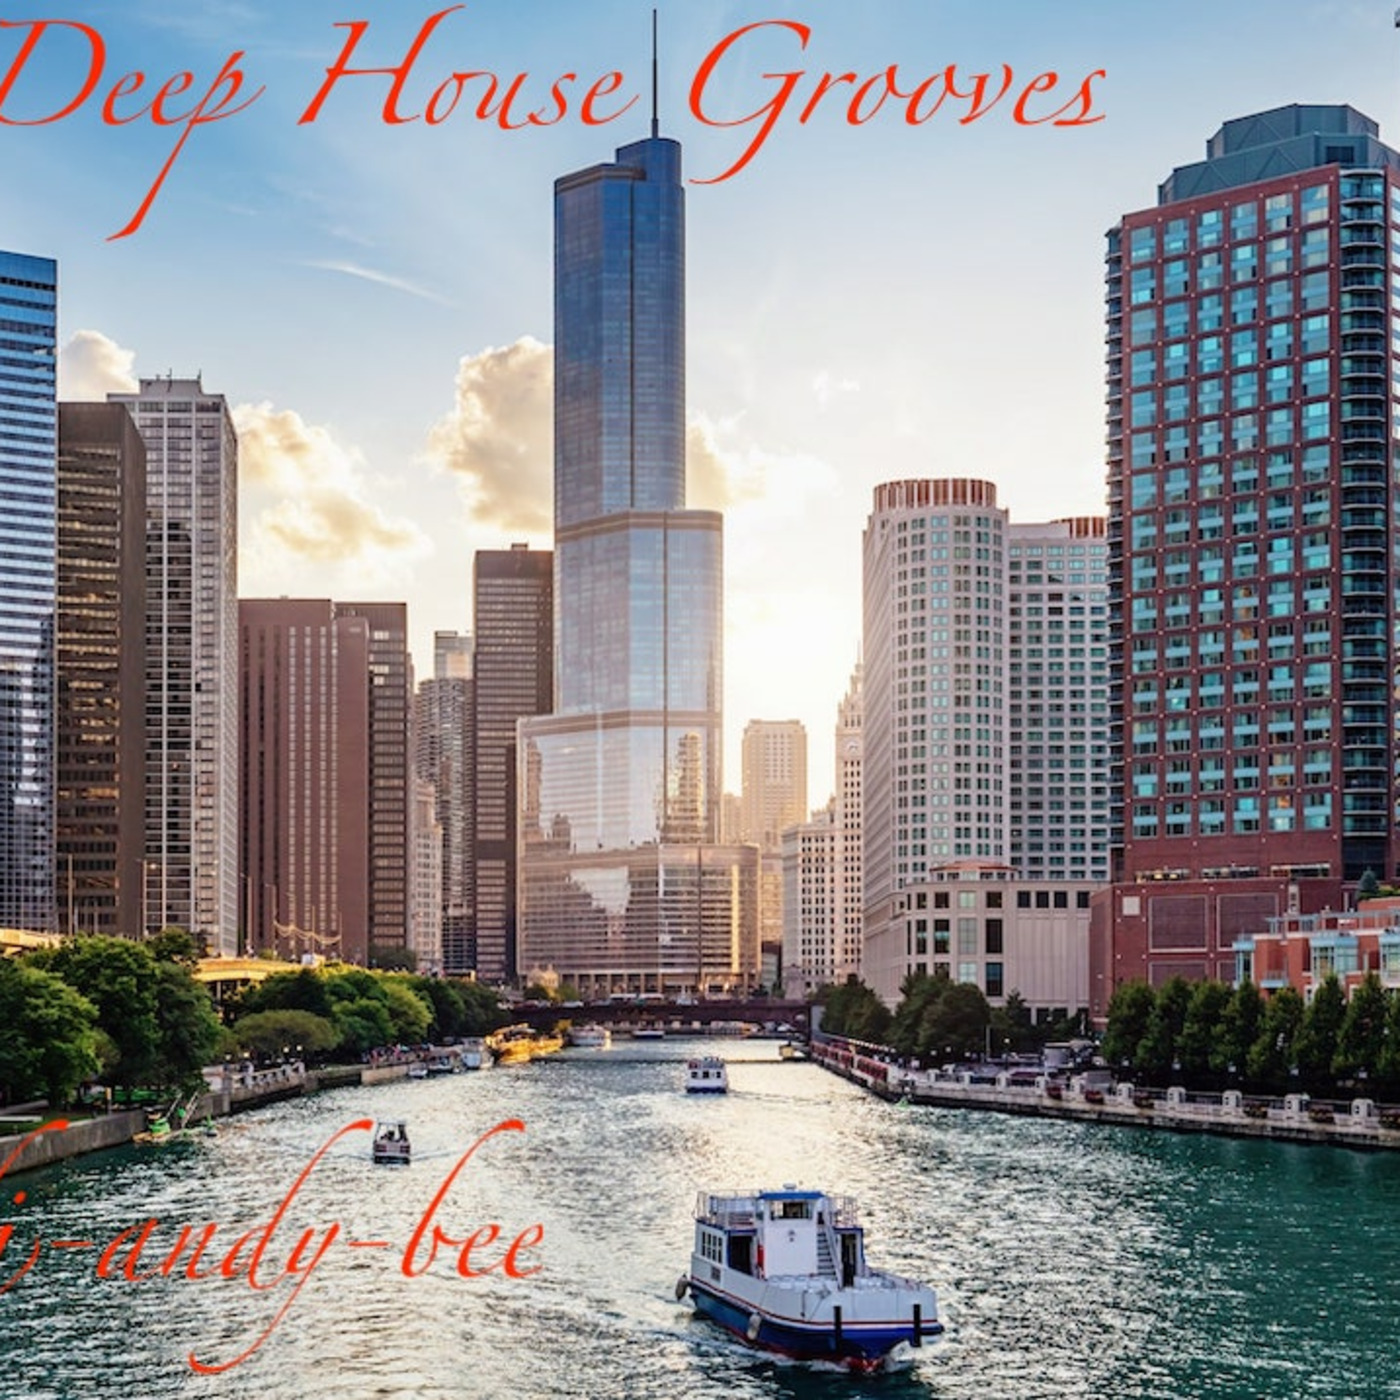 Episode 236: Deep House Grooves August 2021